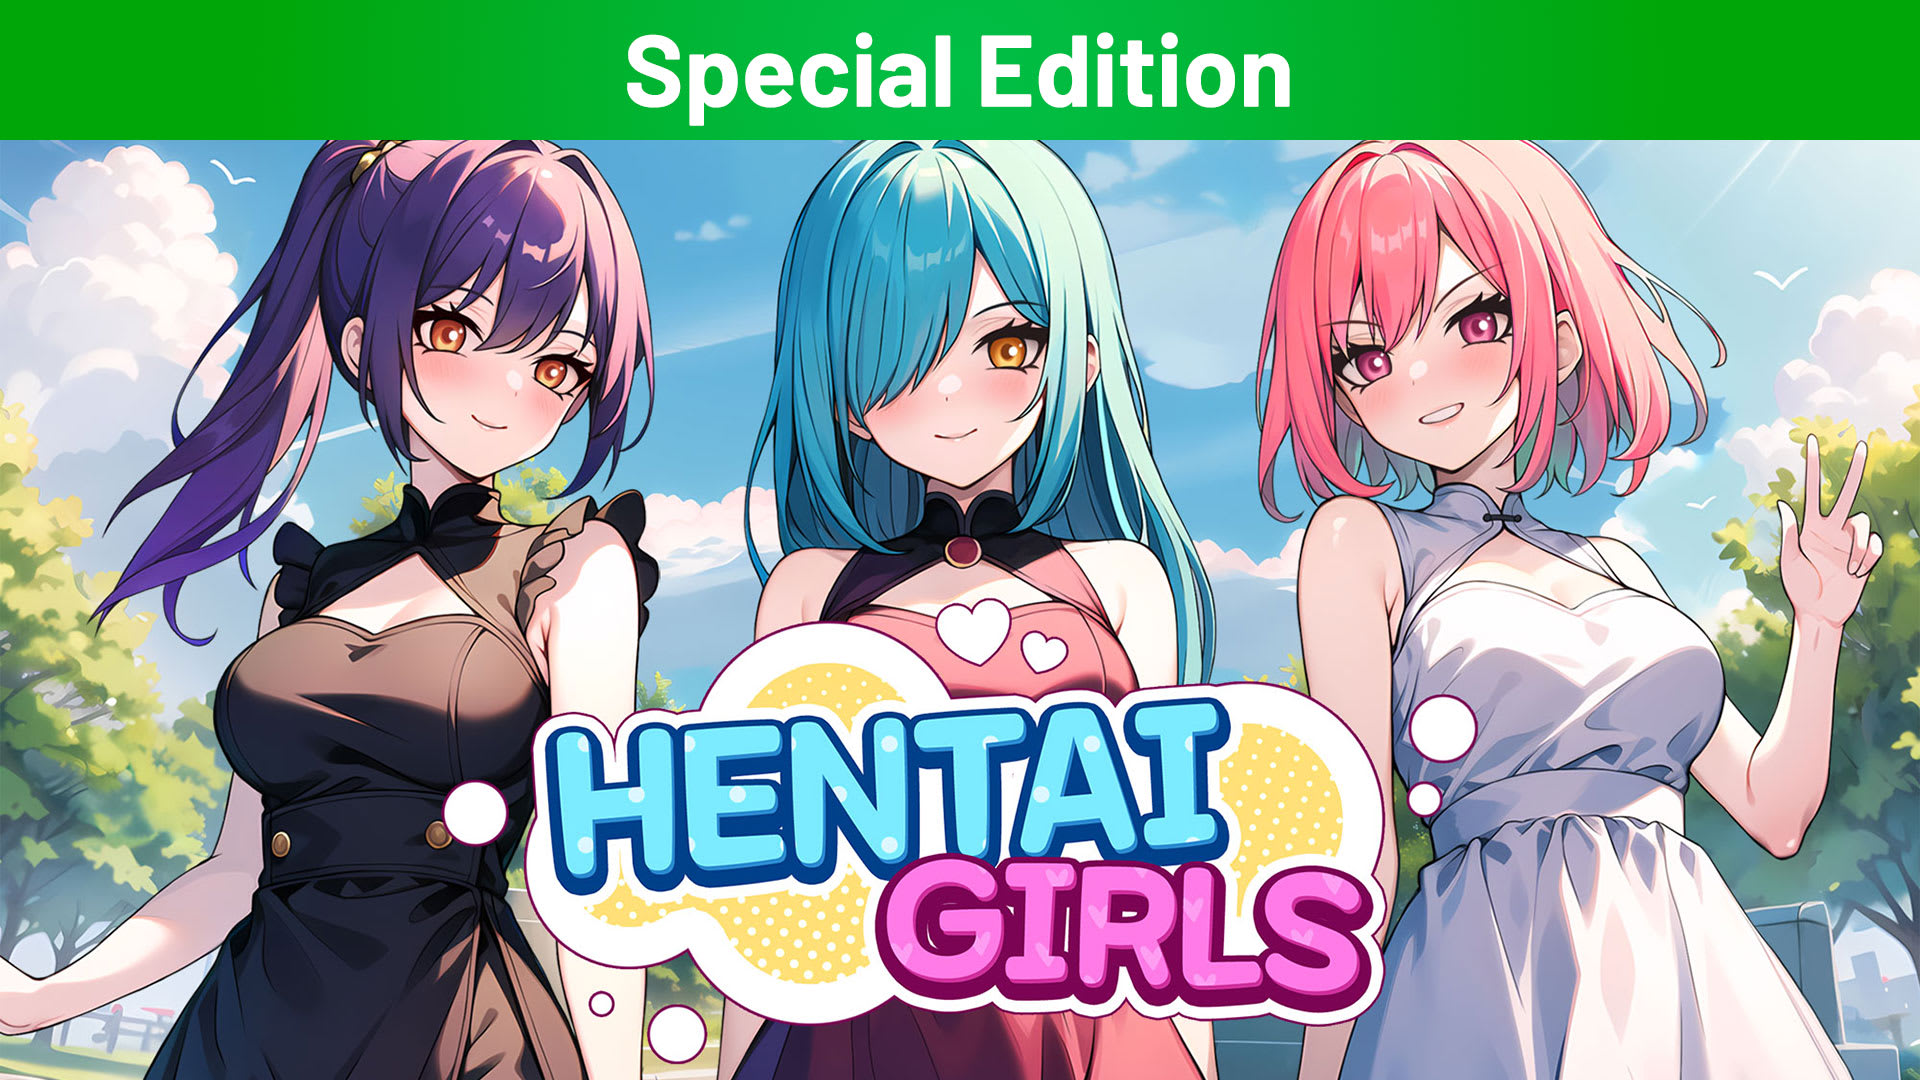 Hentai Girls Special Edition